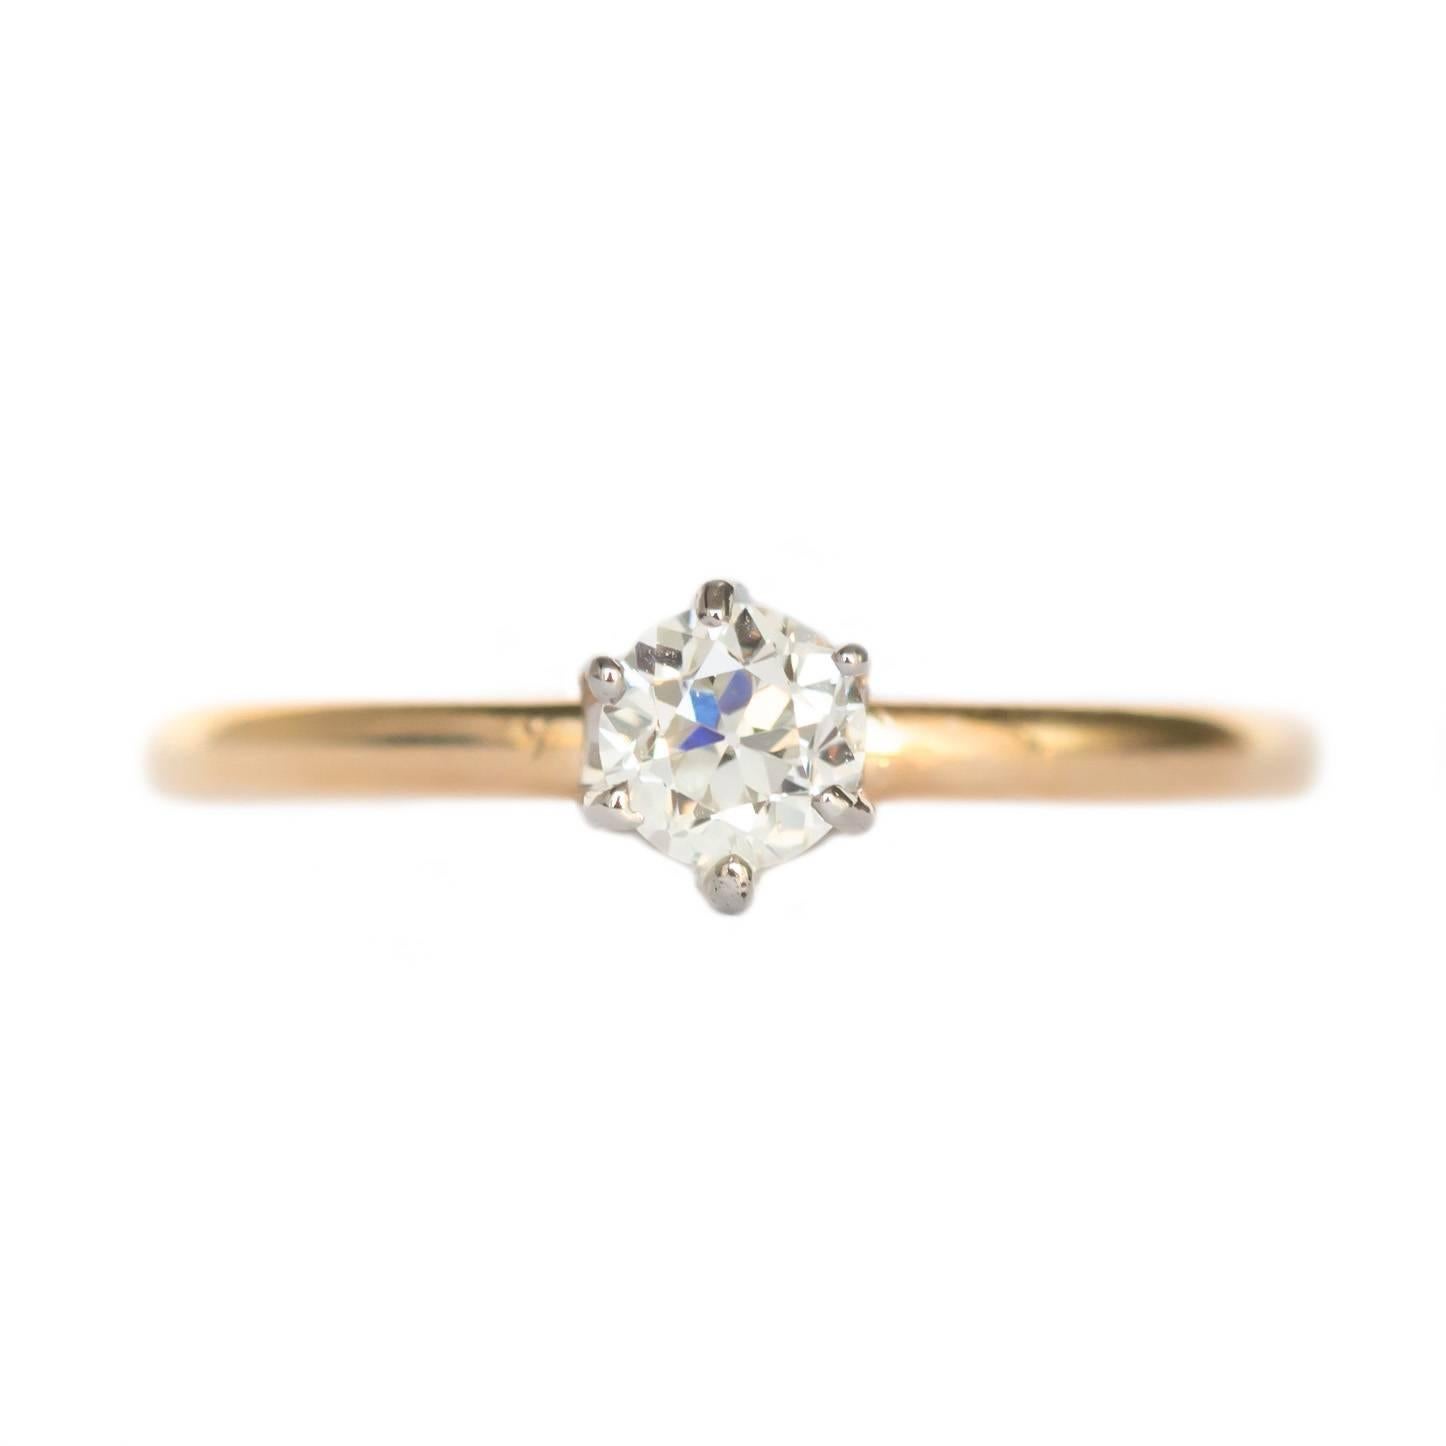 .26 Carat Yellow Gold and Platinum Tiffany & Co. Engagement Ring